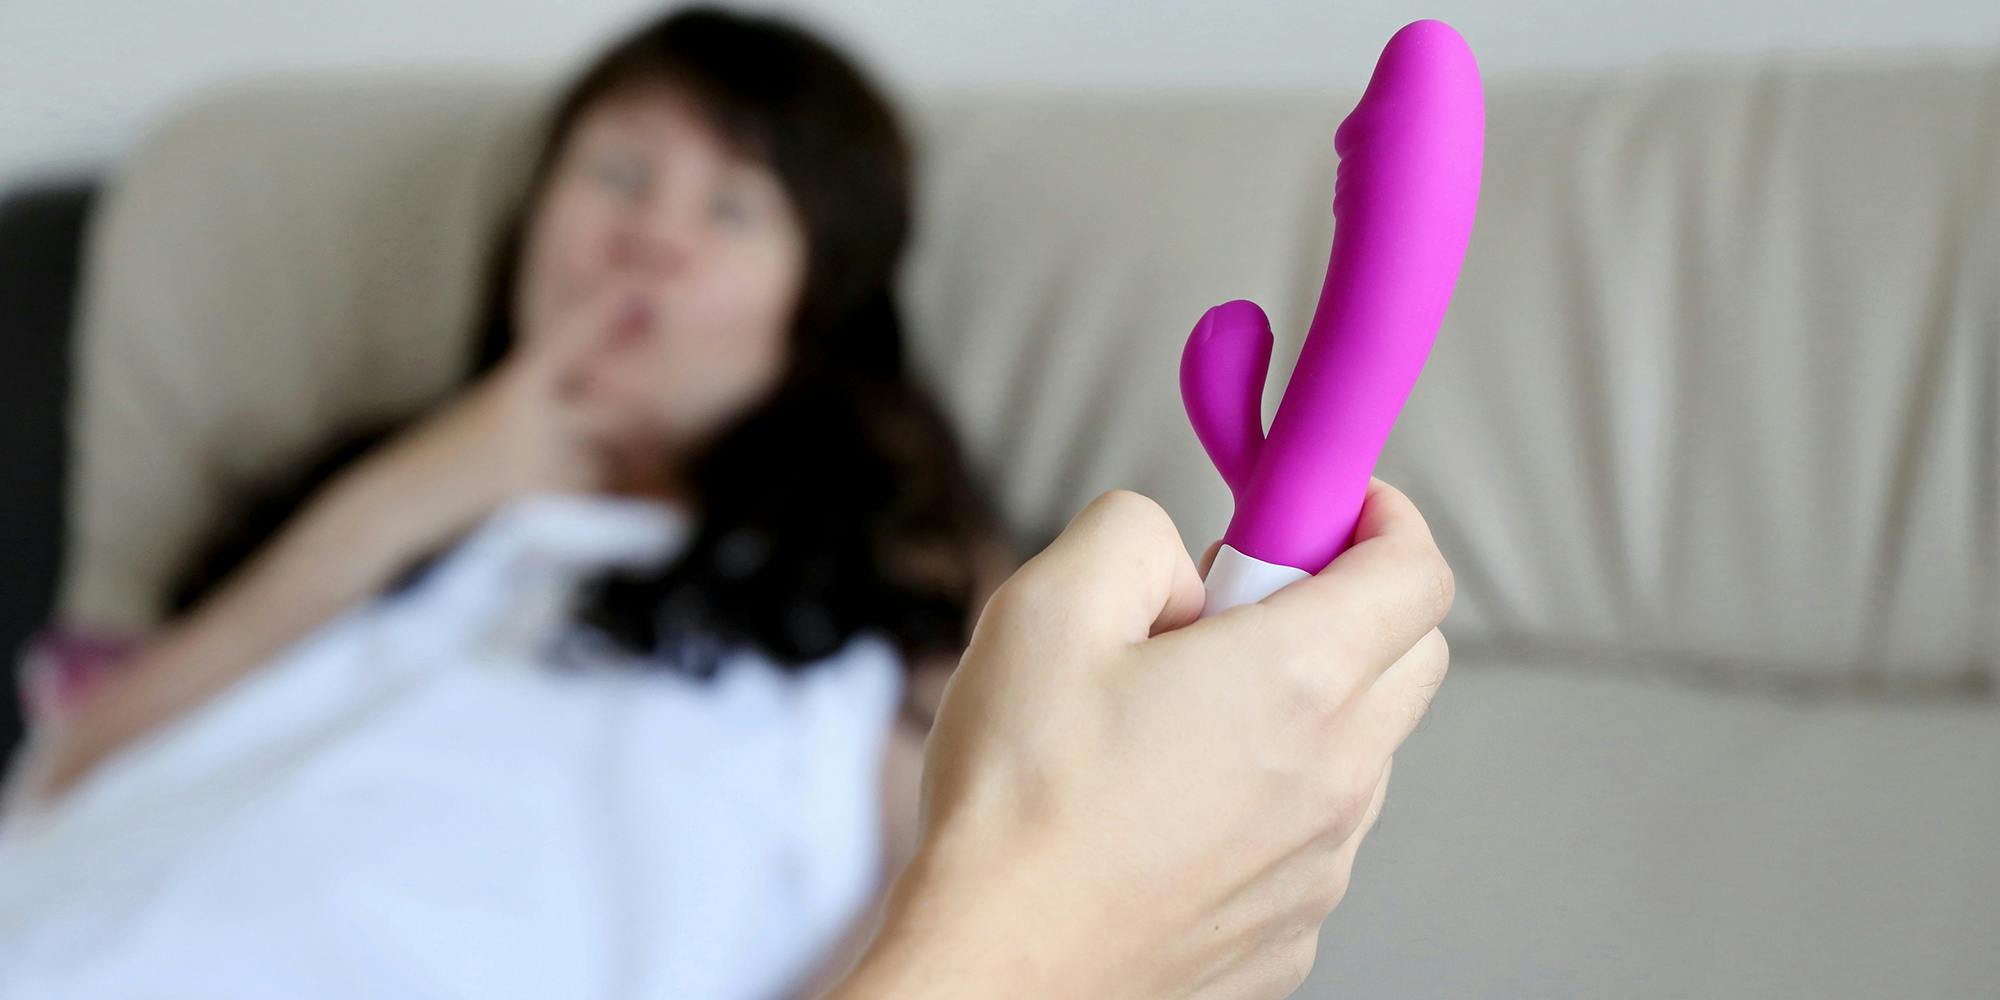 These sex toy porn sites have us buzzing